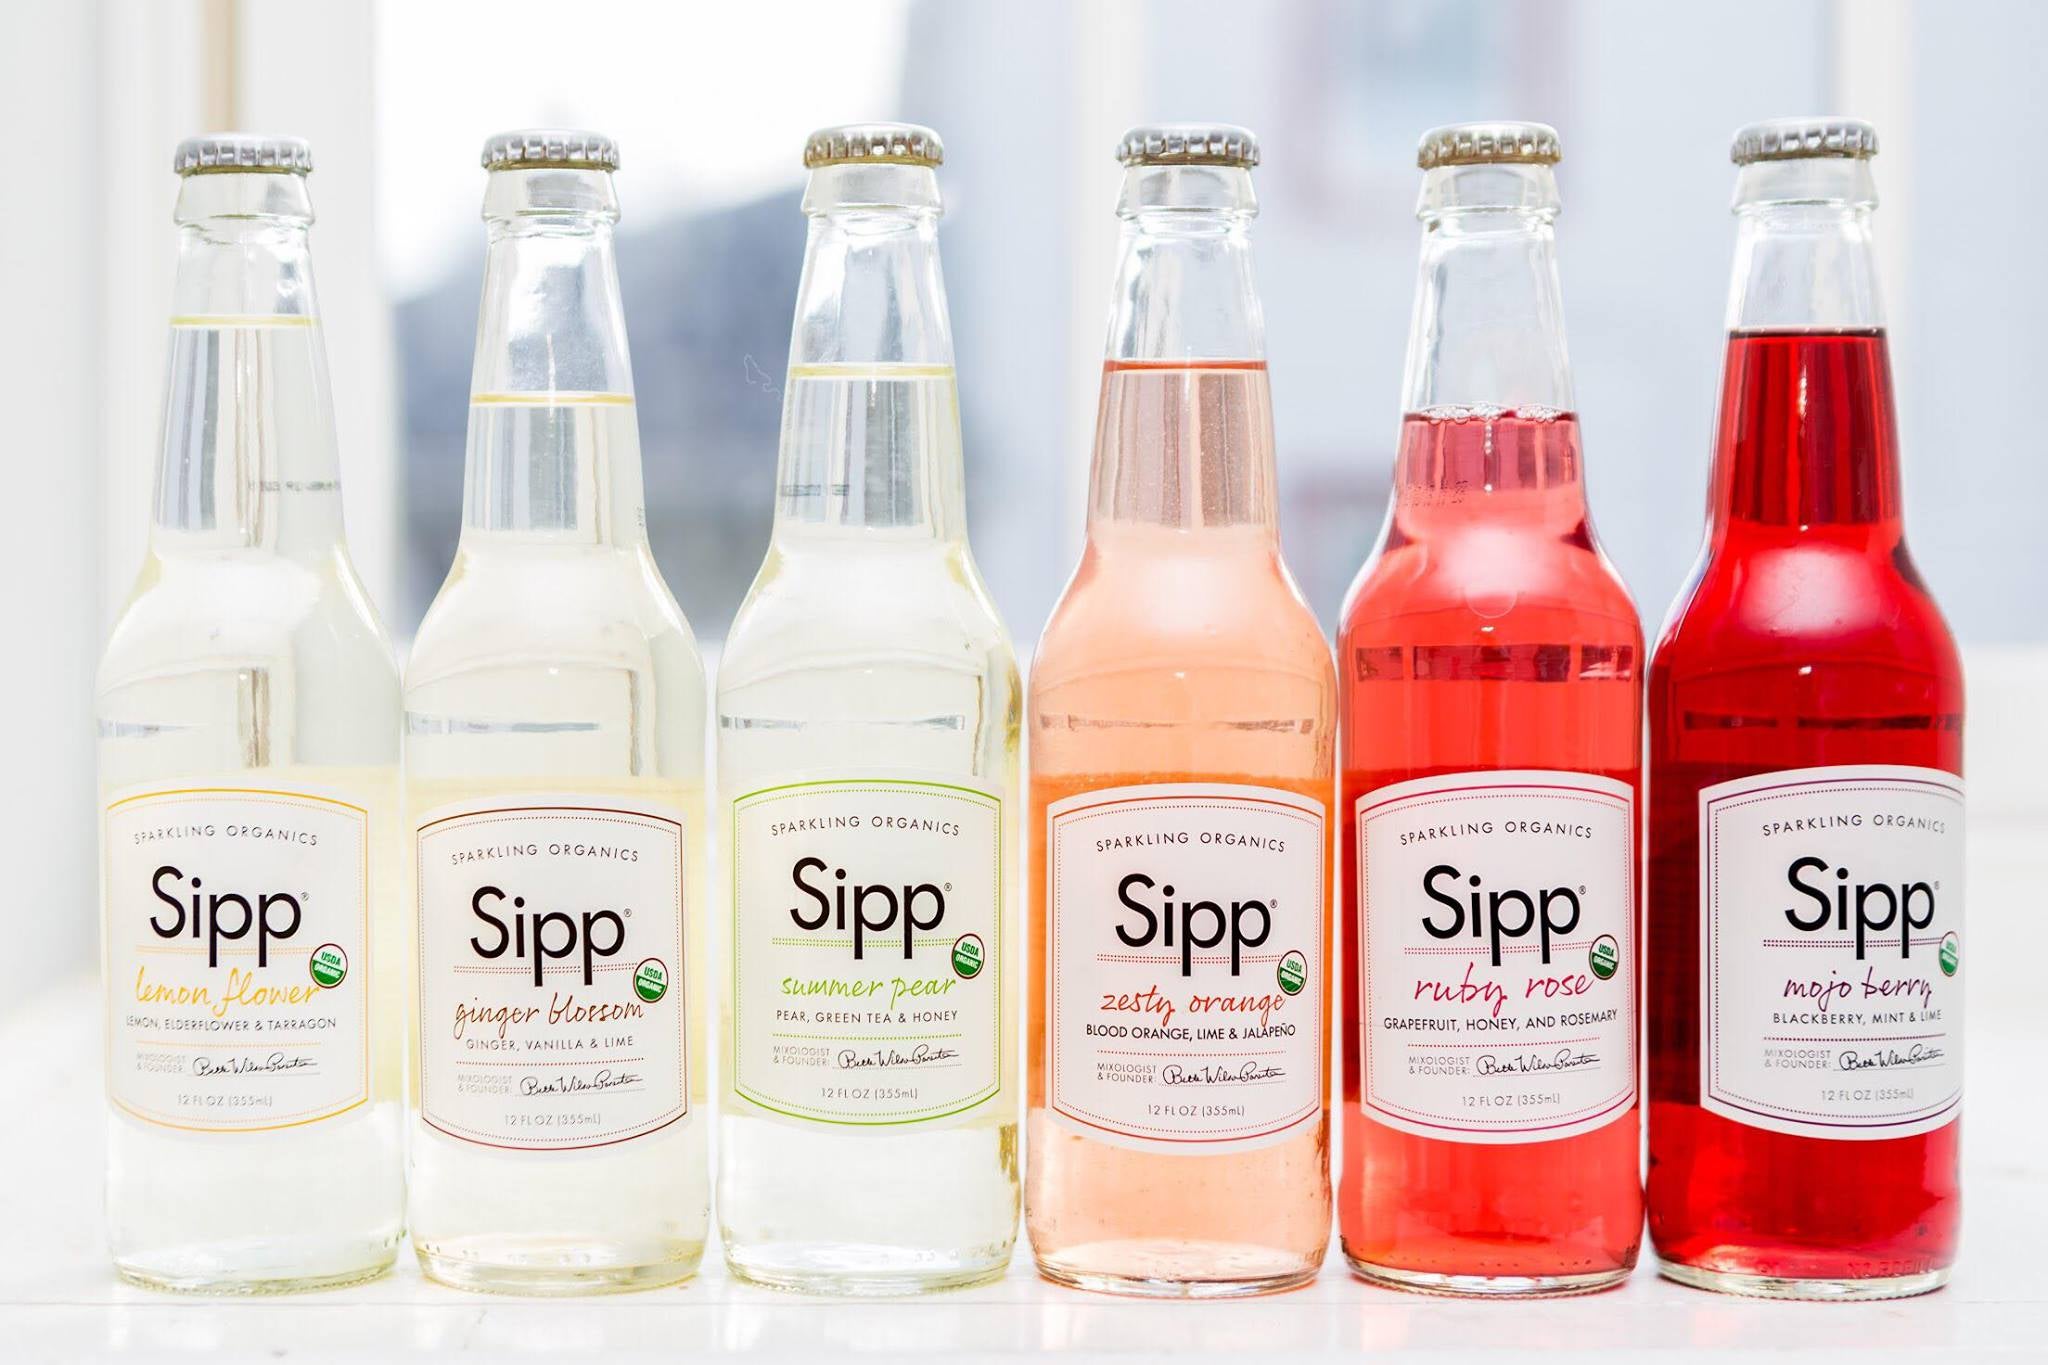 6 bottles containing various sipp beverage flavors